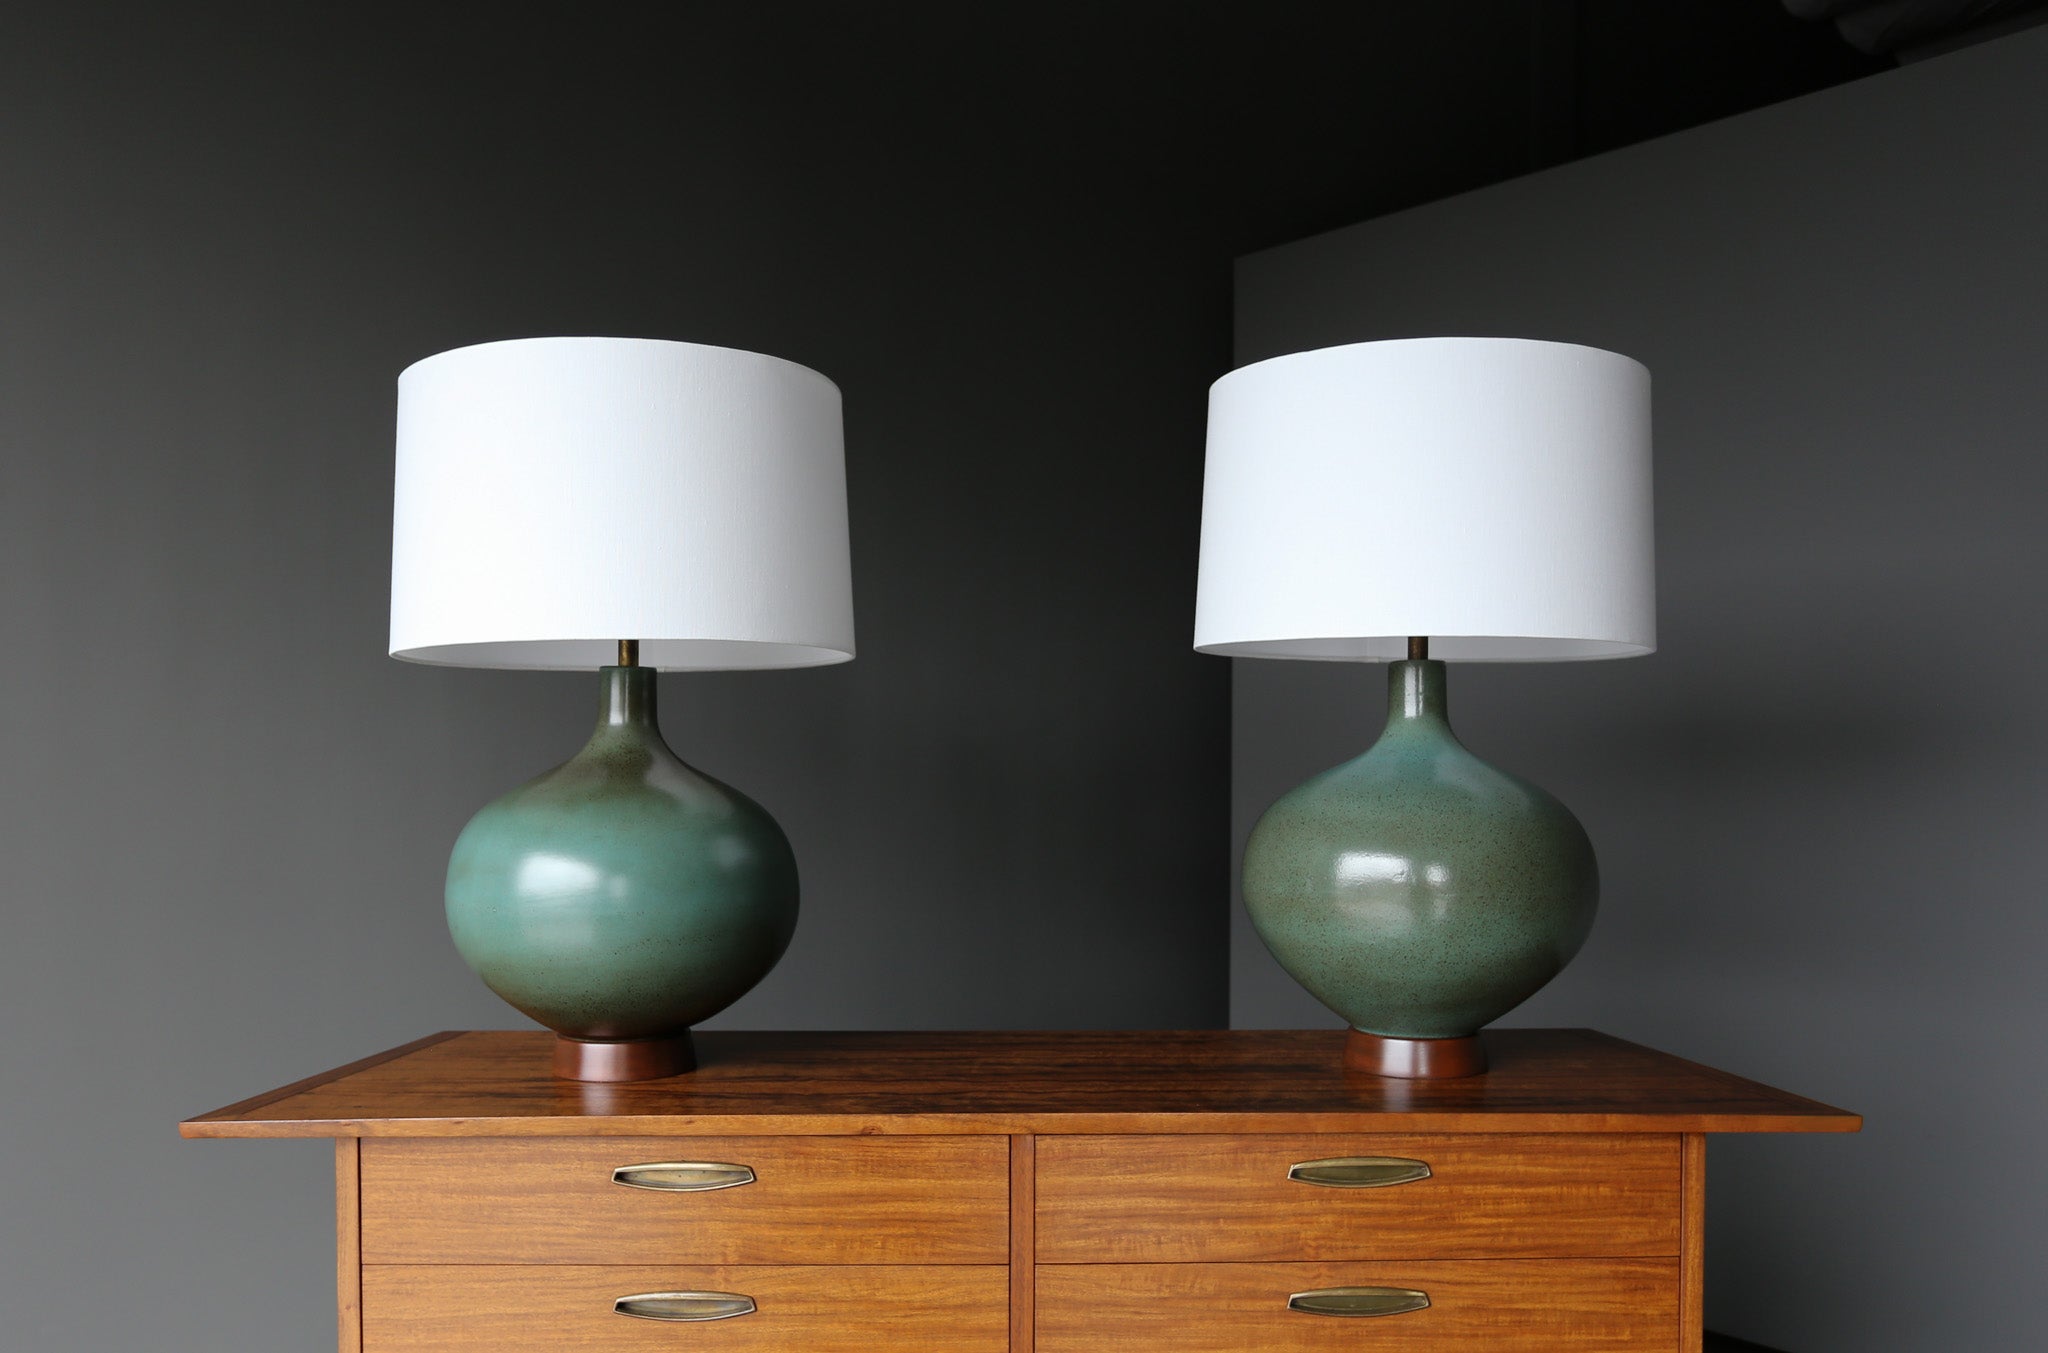 David Cressey Large Scale Ceramic Lamps, California, circa 1970.  This pair has been professionally rewired.  

Measures: 25.5